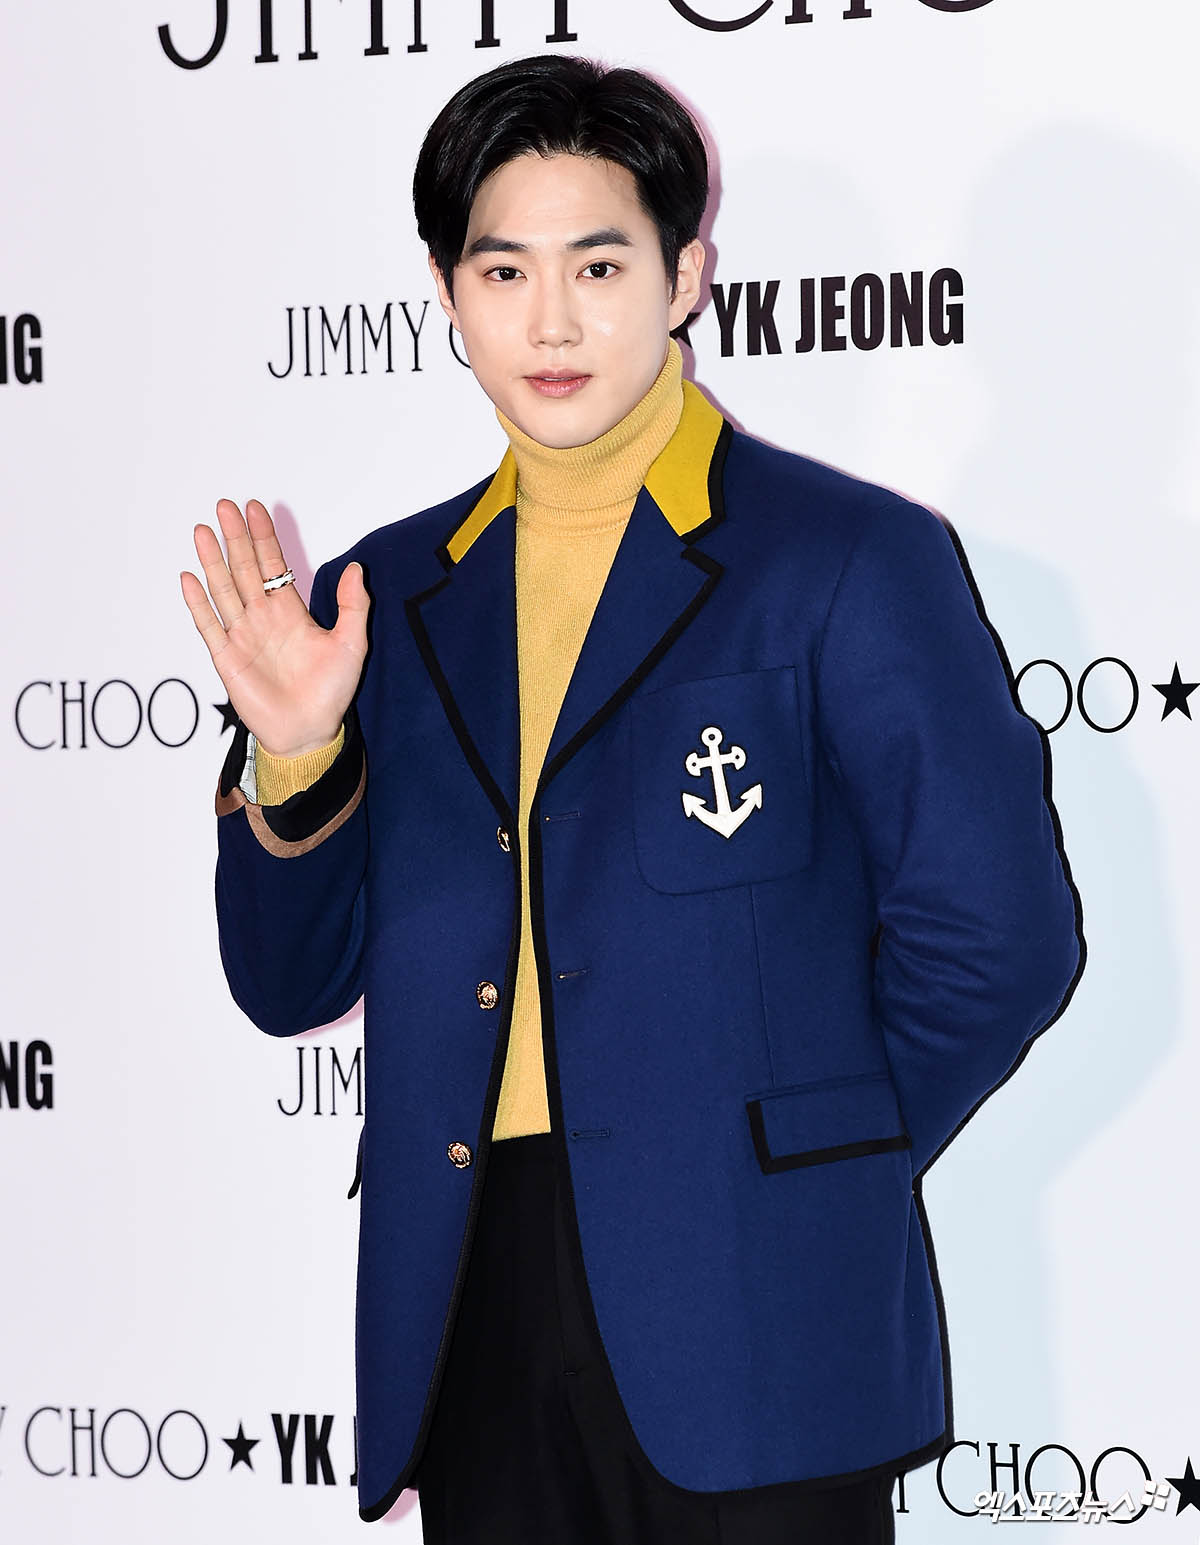 EXO Suho, who attended the event to commemorate the launch of a British luxury accessory brand held at the dress garden in Cheongdam-dong, Seoul, on the afternoon of the 9th day, has photo time.